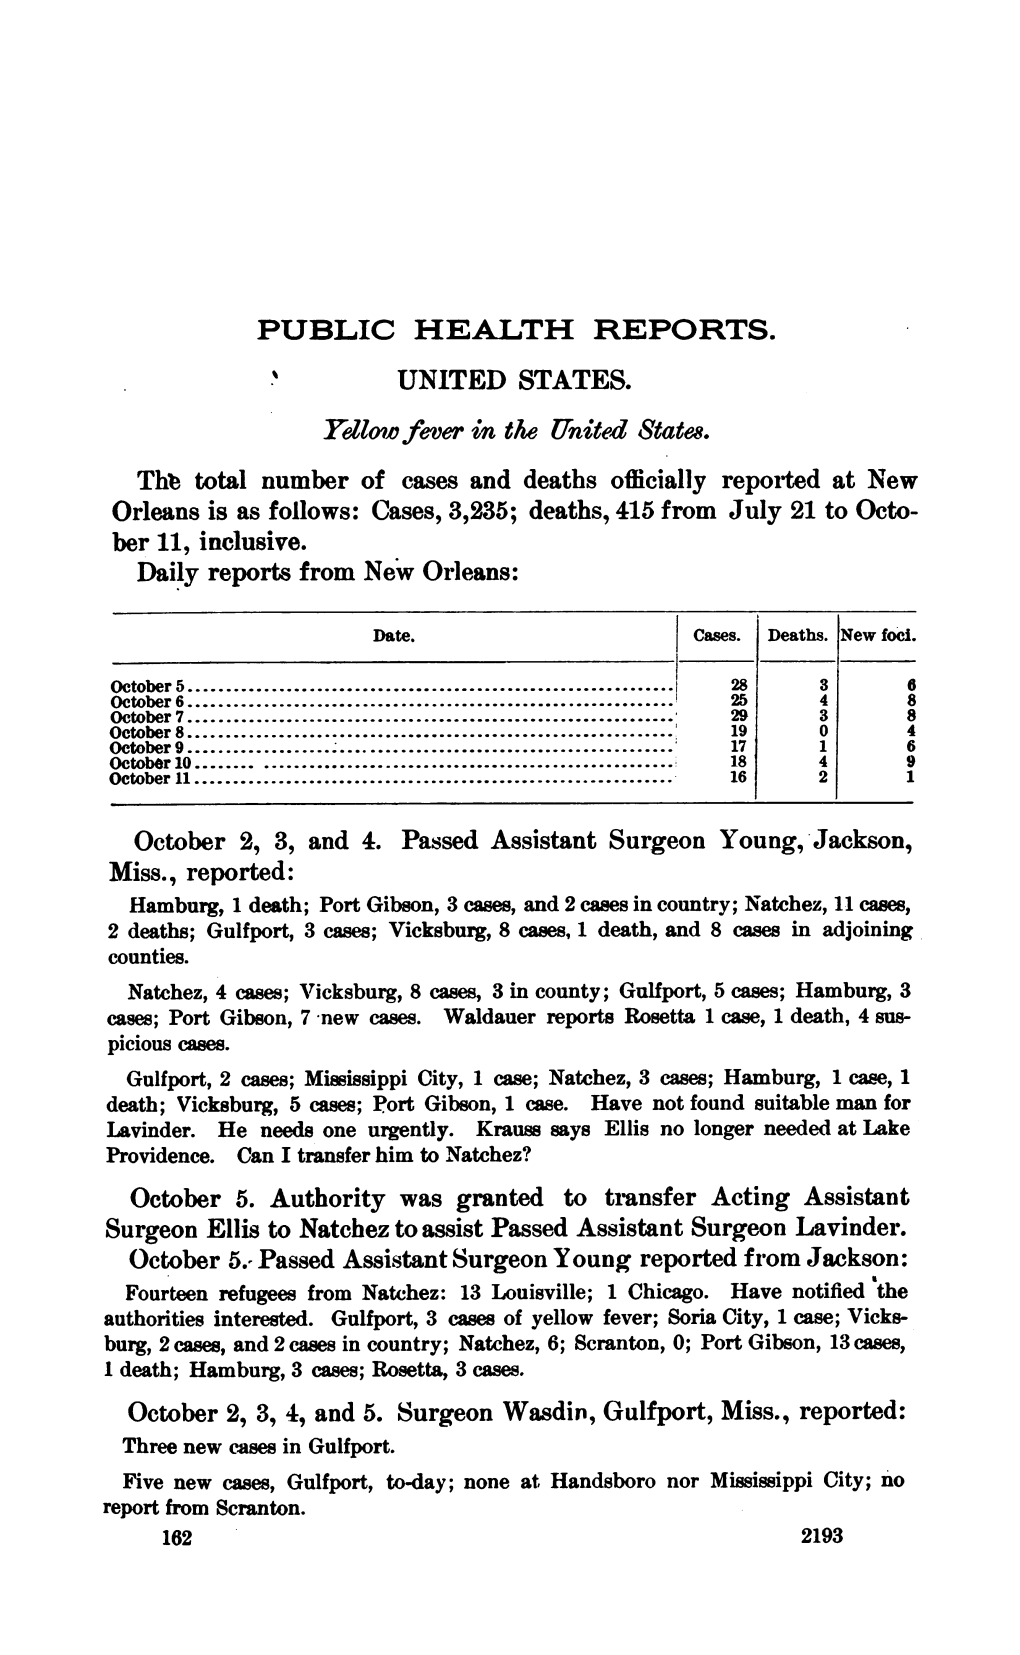 October 2, 3, 4, and 5. Surgeon Wasdirn, Gulfport, Miss., Reported: Three New Cases in Gulfport